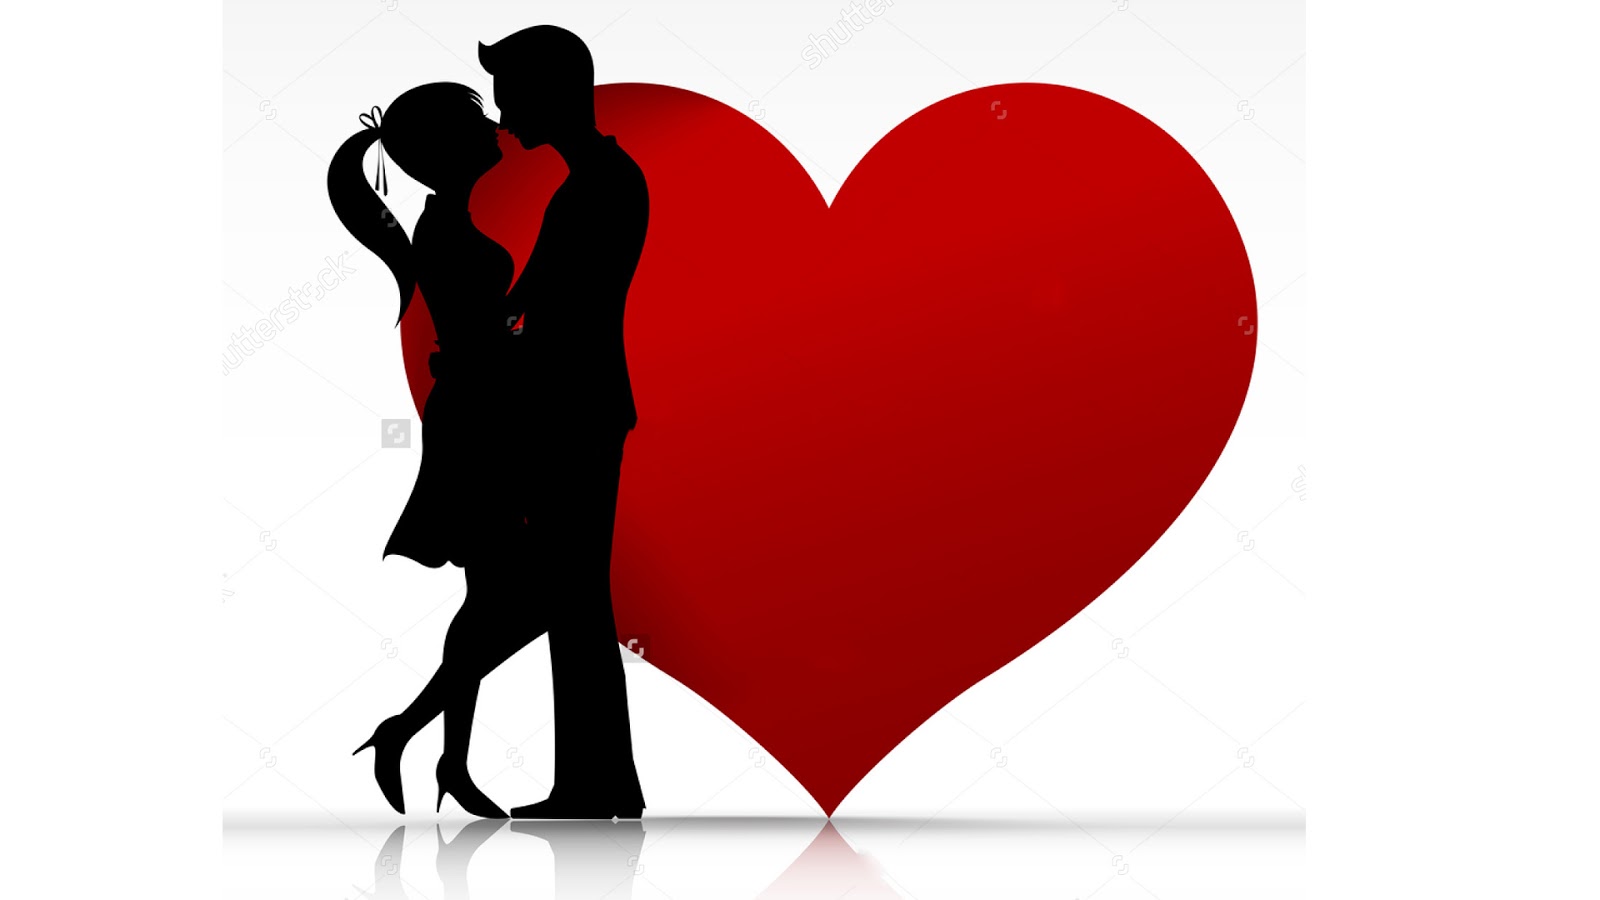 kiss day wallpaper download,love,heart,valentine's day,romance,silhouette